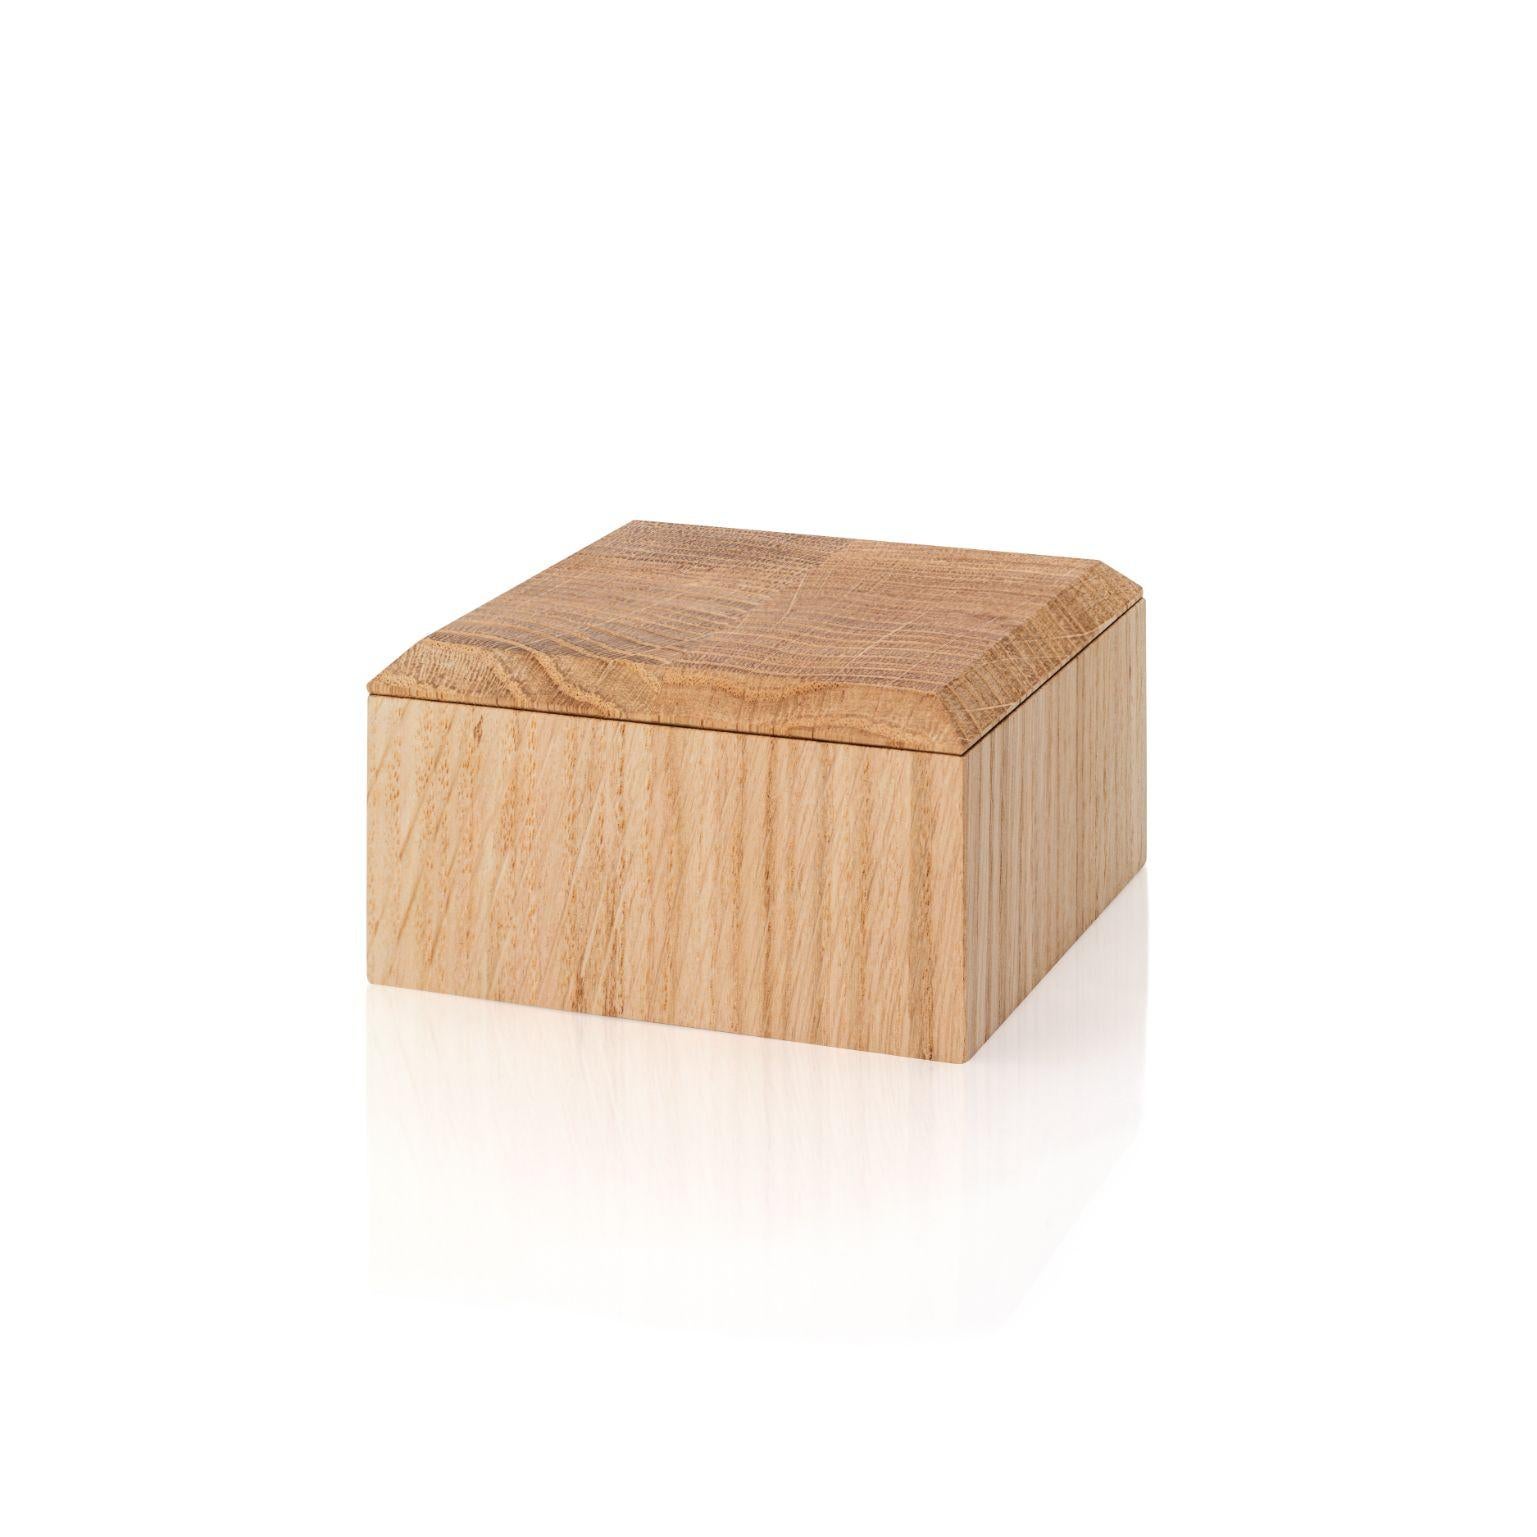 Small Pino boxes by Antrei Hartikainen.
Materials: Oak, natural oil wax.
Dimensions: W 18 / 14, D 9, H 5 / 7cm.

A set of three vertical and two horizontal stacking boxes constructed of vividly grained woods. The pino boxes may be arranged in